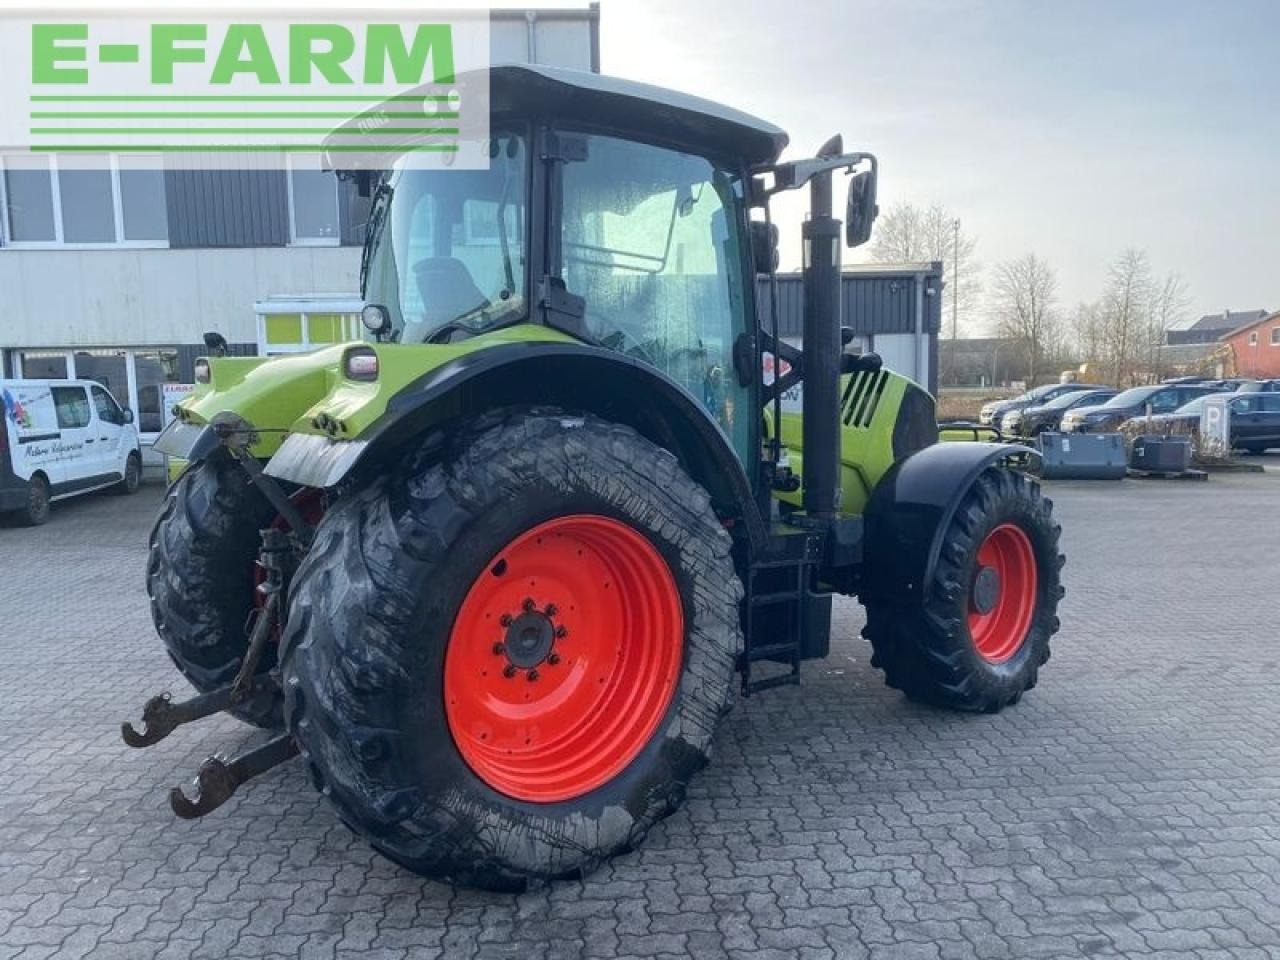 Tractor CLAAS arion 620 cmatic